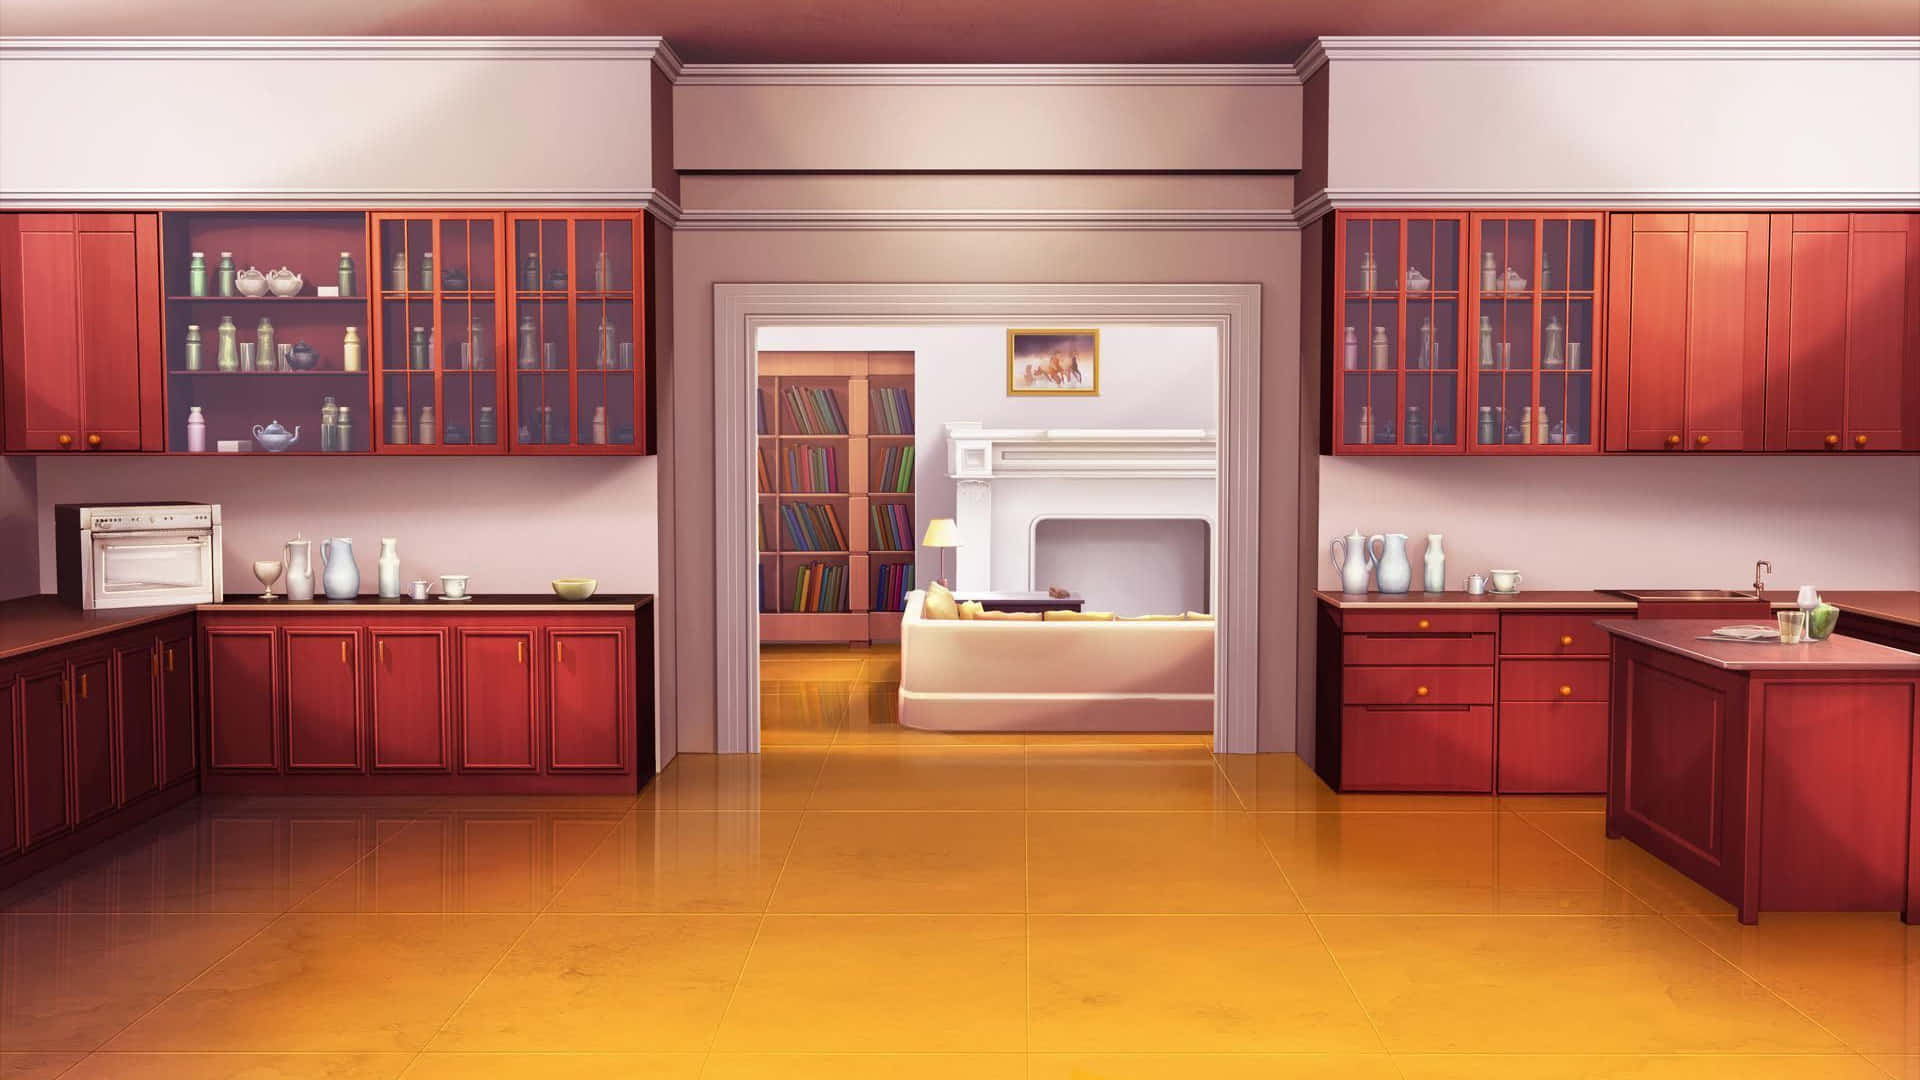 Kitchen Japanese Anime Style Background Kitchen Japanese Animation Kitchen  Japanese Background Image And Wallpaper for Free Download